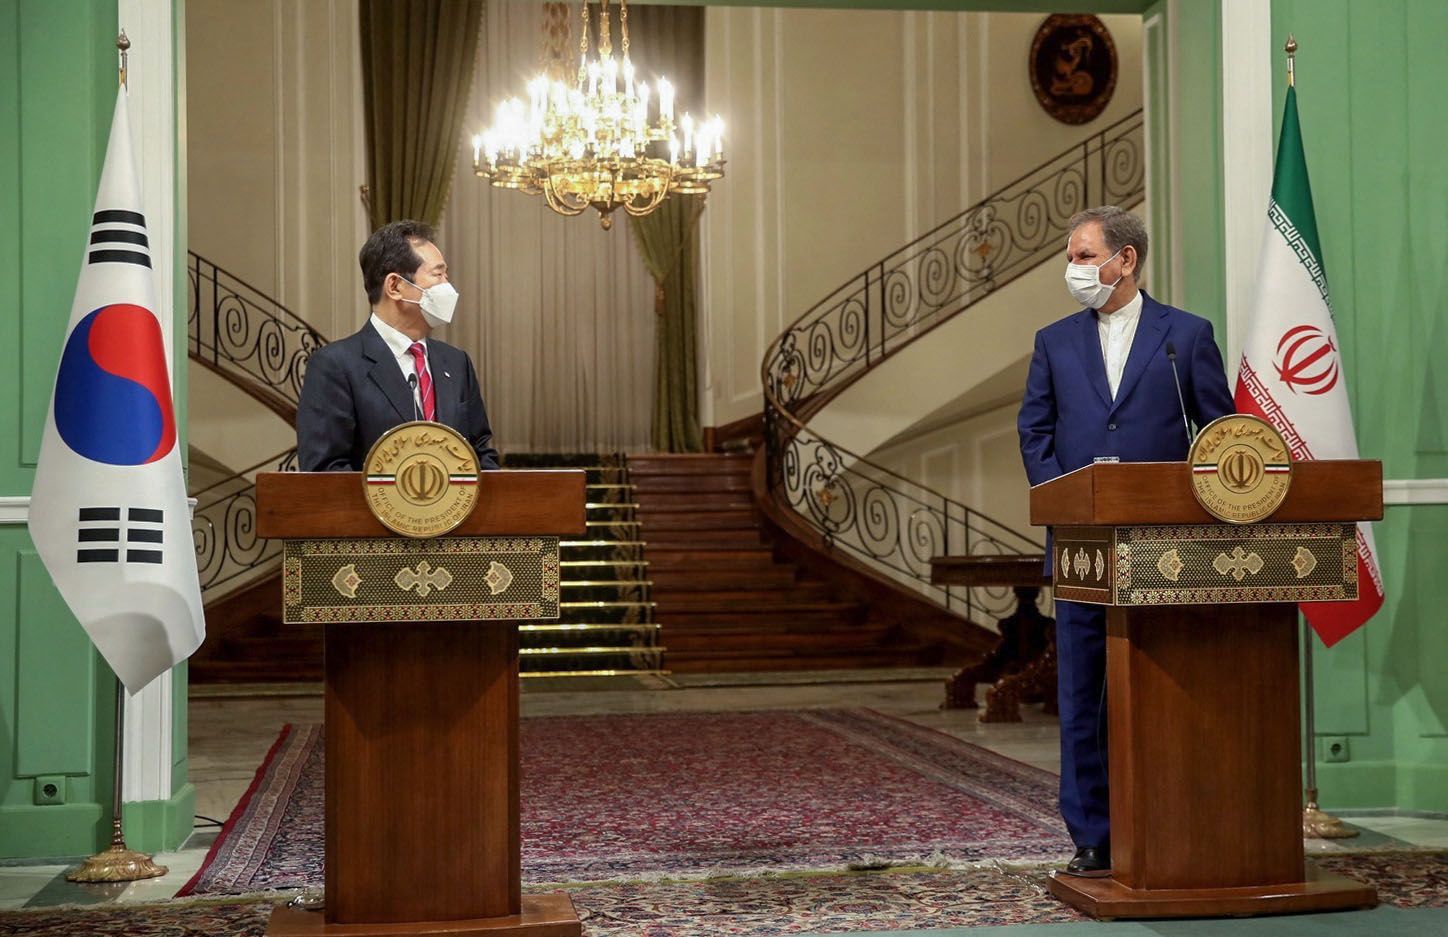 A handout picture provided by the official website of Iran's Vice President on April 11, 2021 shows Vice-President Eshaq Jahangiri (R) and South Korea's Prime Minister Chung Sye-kyun during a joint press conference after their meeting in Tehran. (Photo by - / Iranian Vice-Presidency / AFP) / XGTY / === RESTRICTED TO EDITORIAL USE - MANDATORY CREDIT 